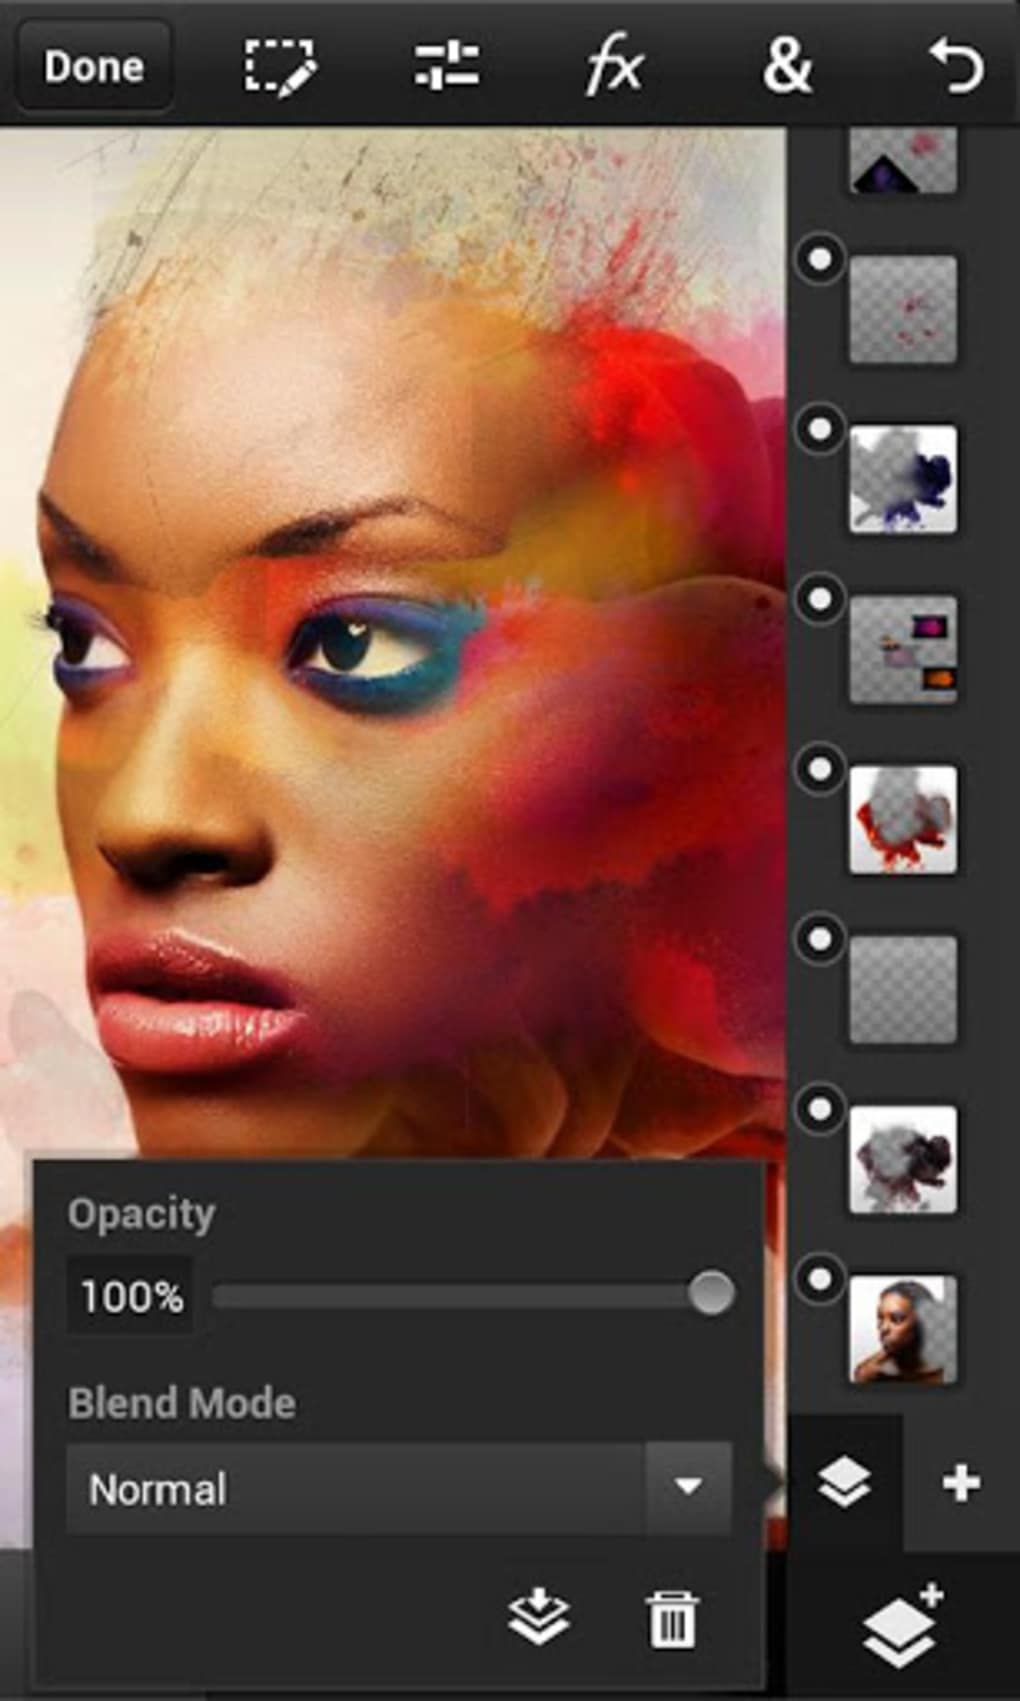 adobe photoshop touch for android full version free download